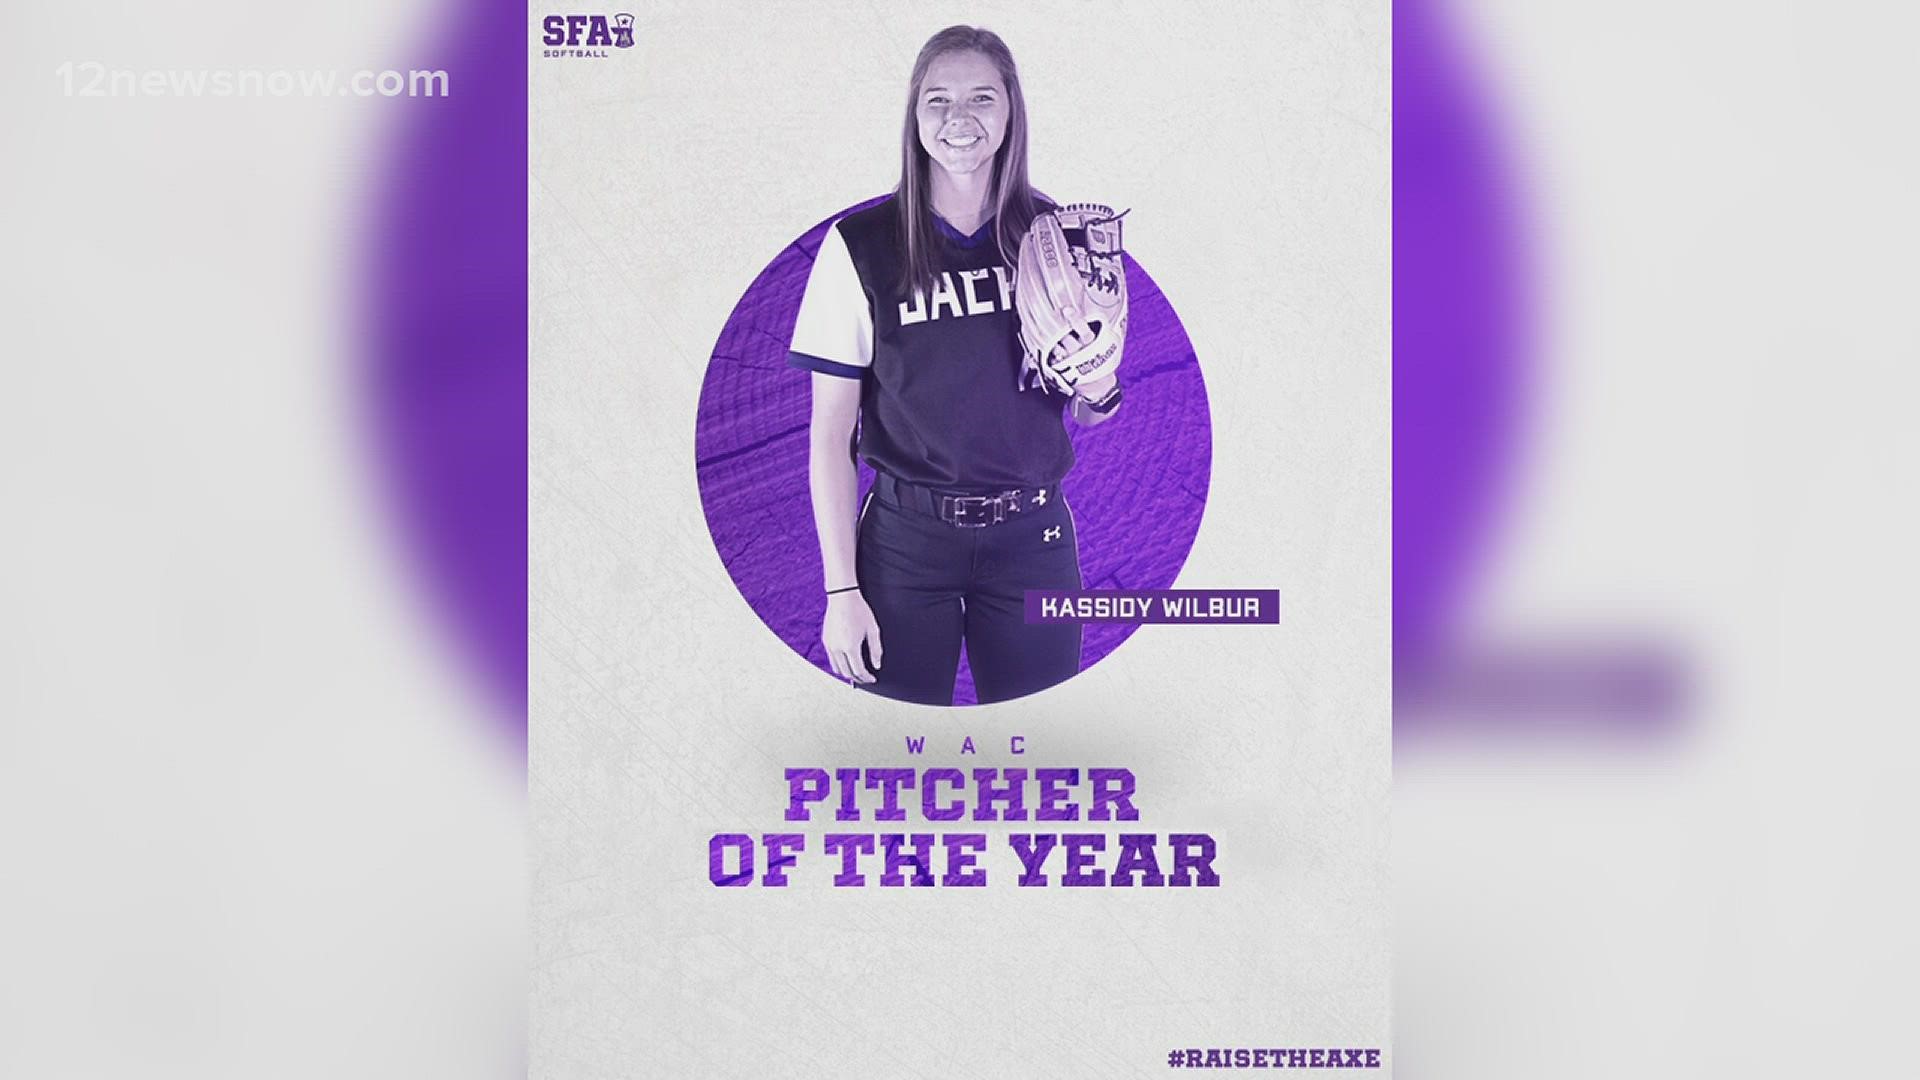 A year after winning the Southland Pitcher of The Year Award, Wilbur is named WAC Pitcher of The Year